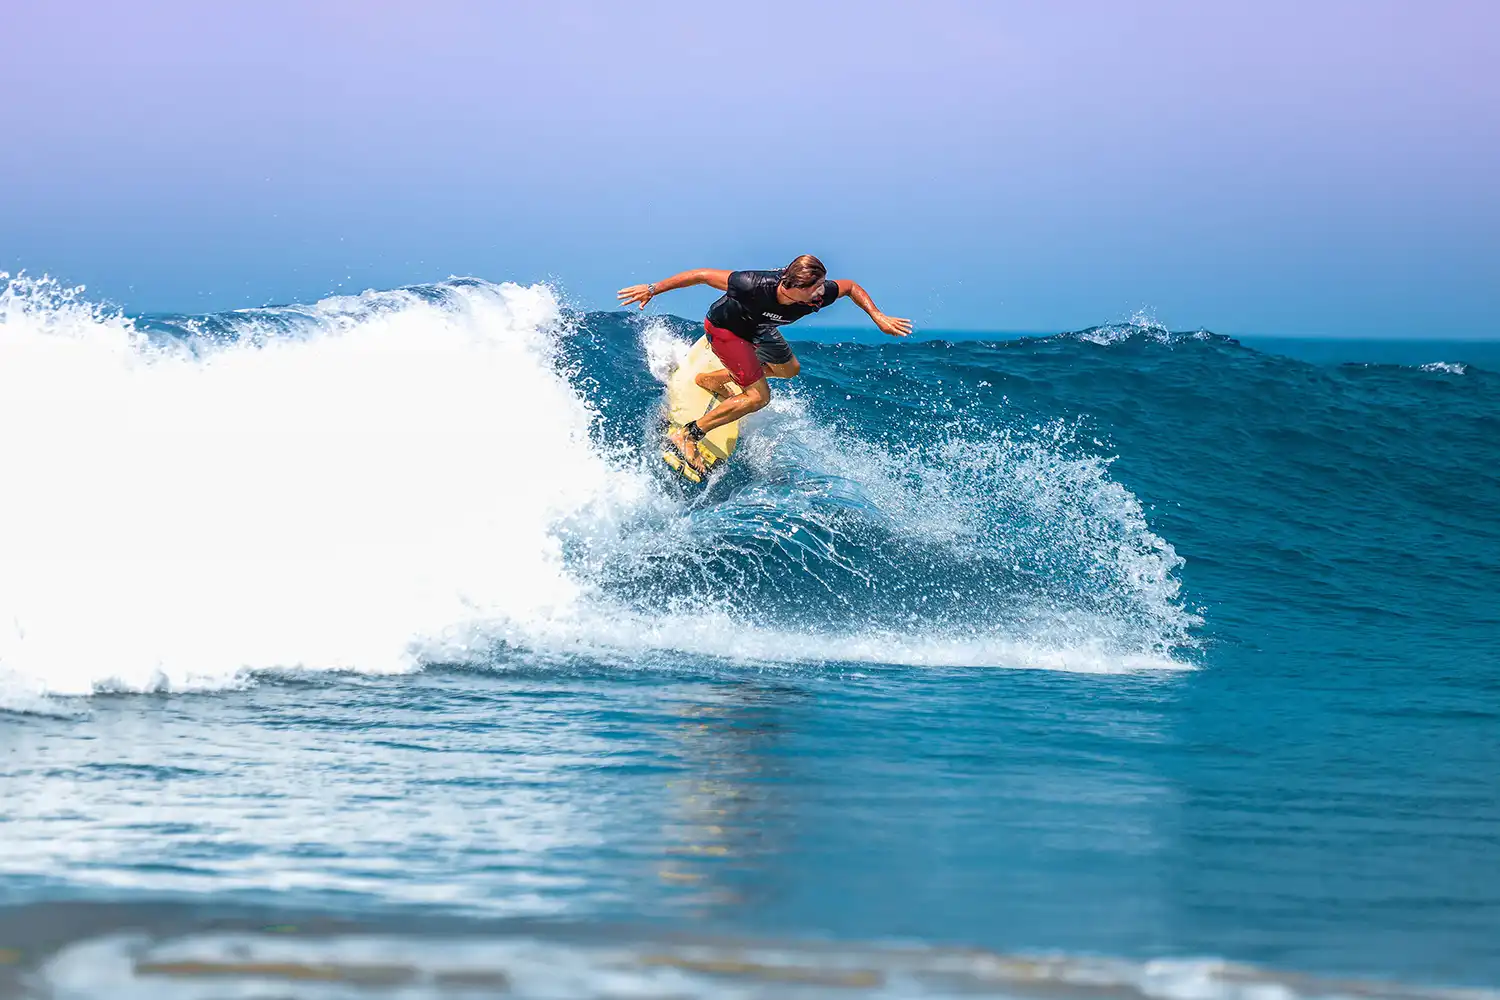 India’s Surfing Scene and International Recognition